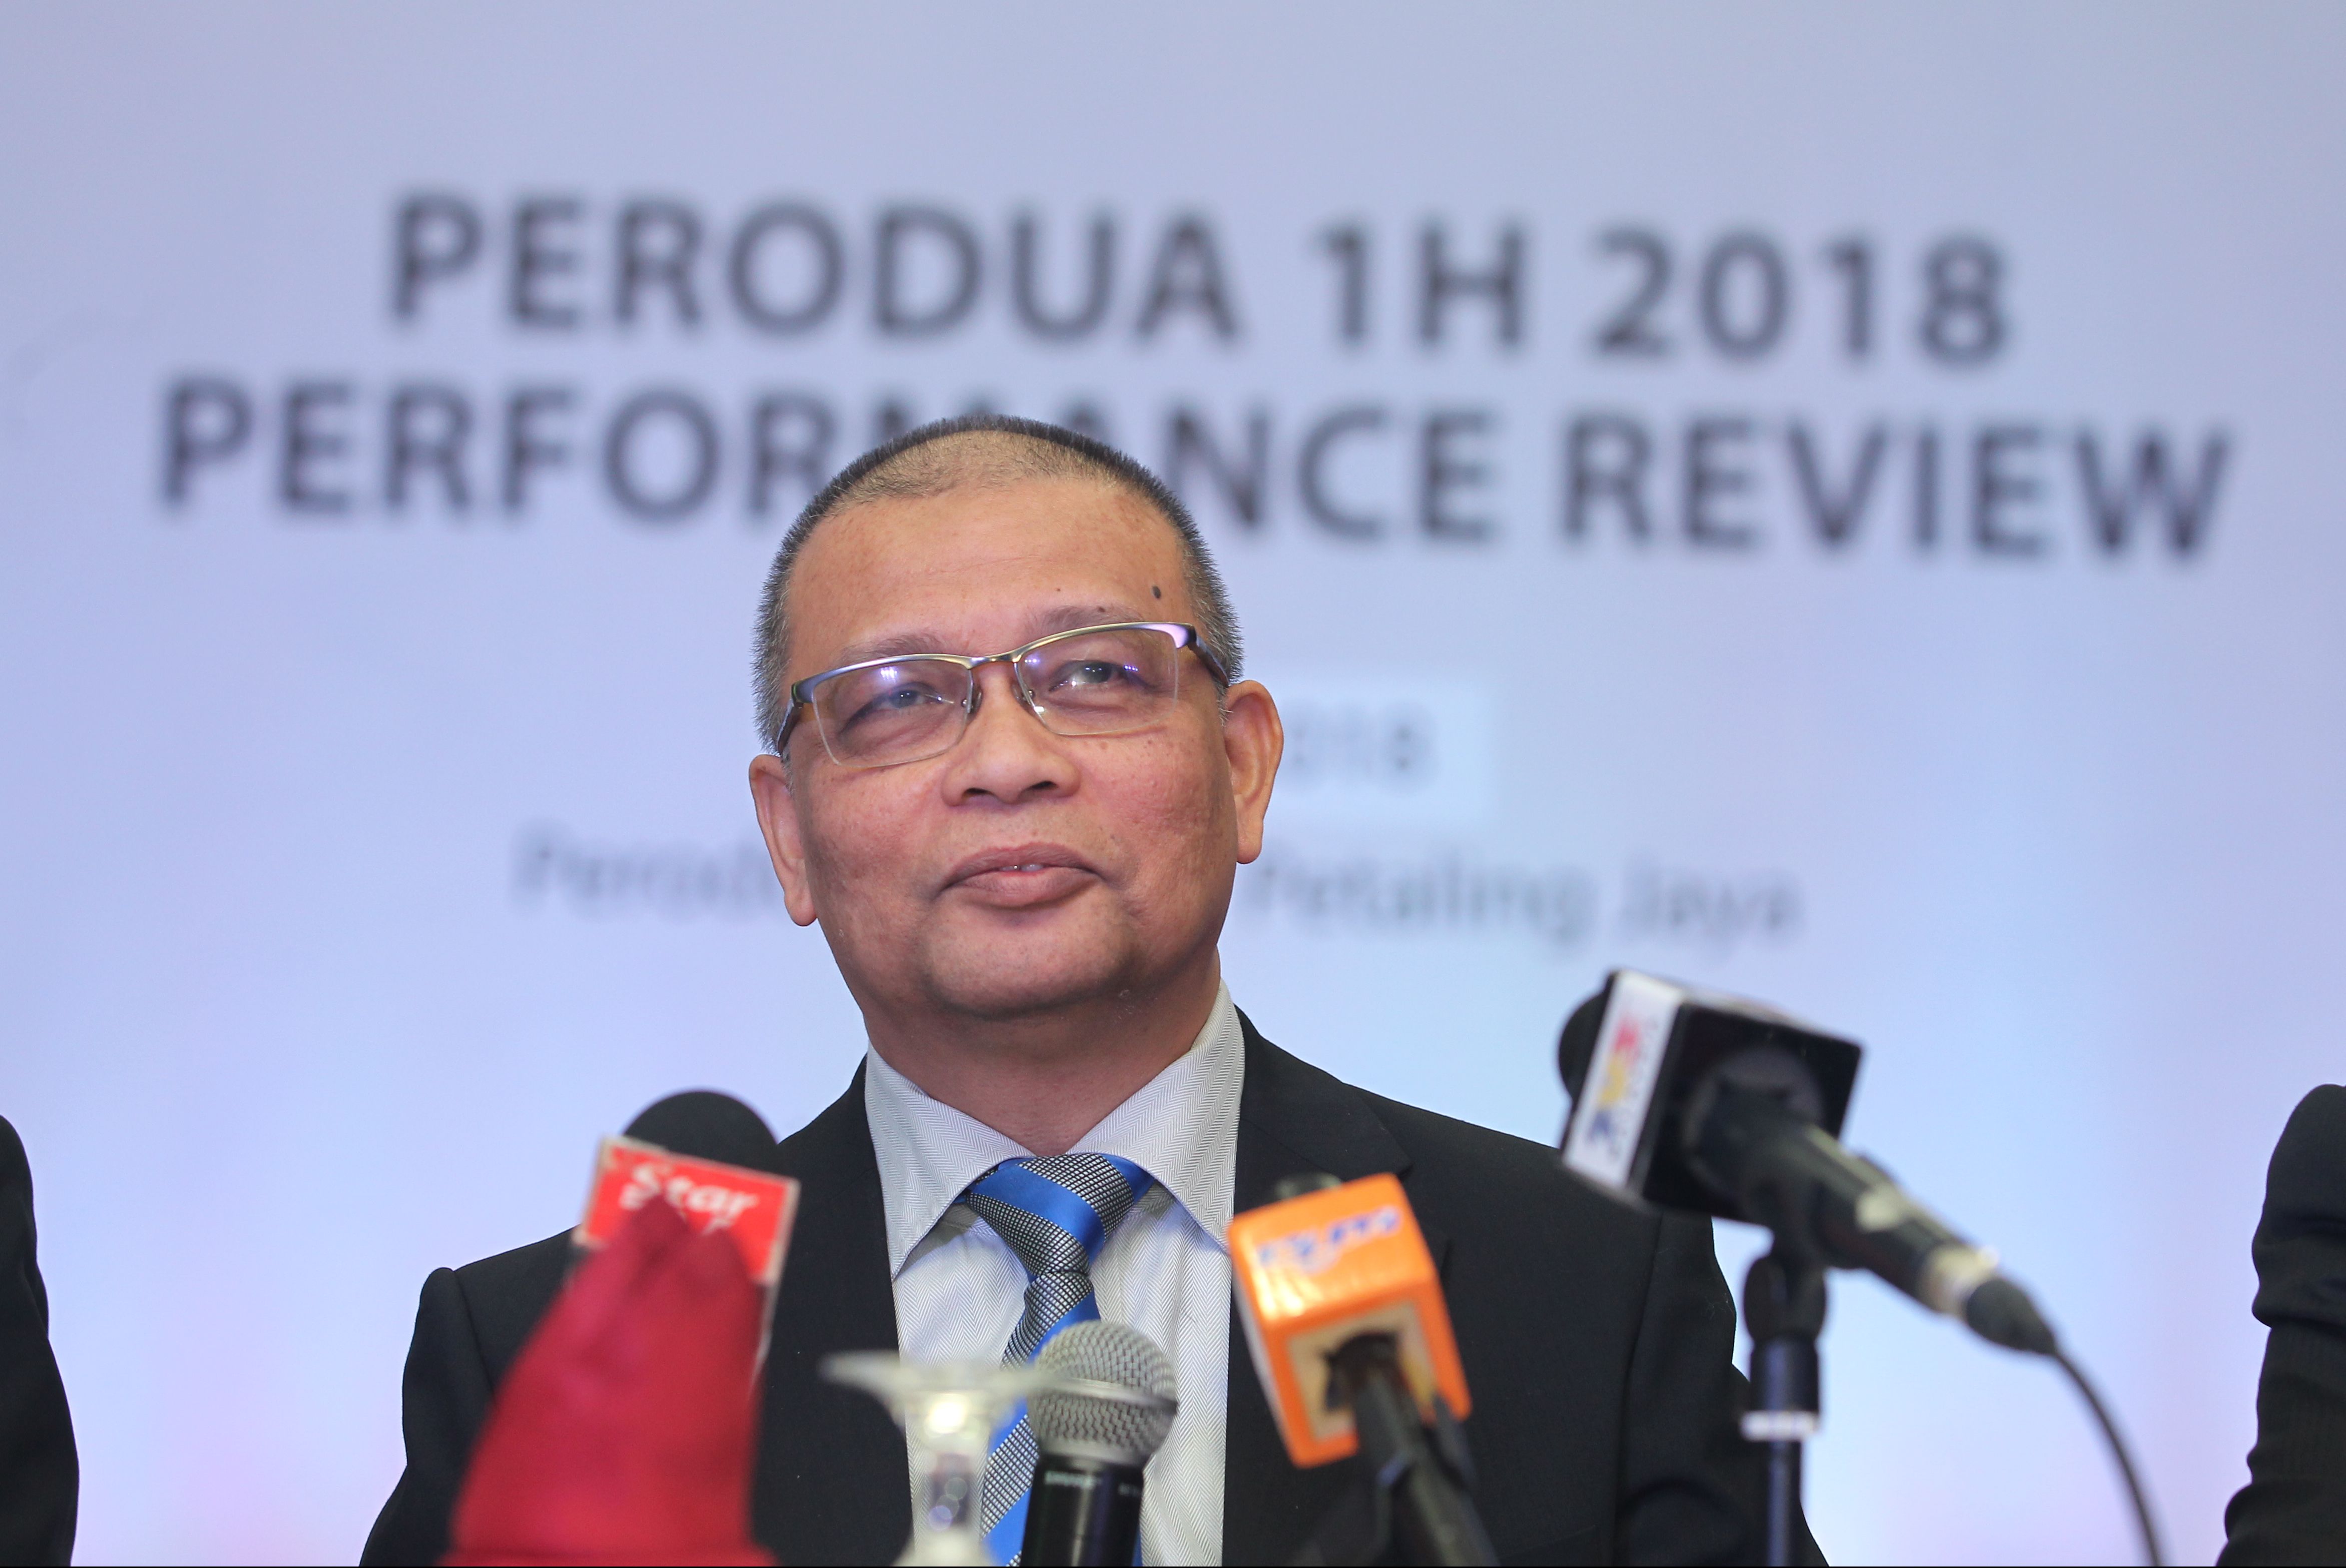 Perodua sold 117,100 vehicles in first half of 2018, 40.4% market share; 209k year-end target maintained